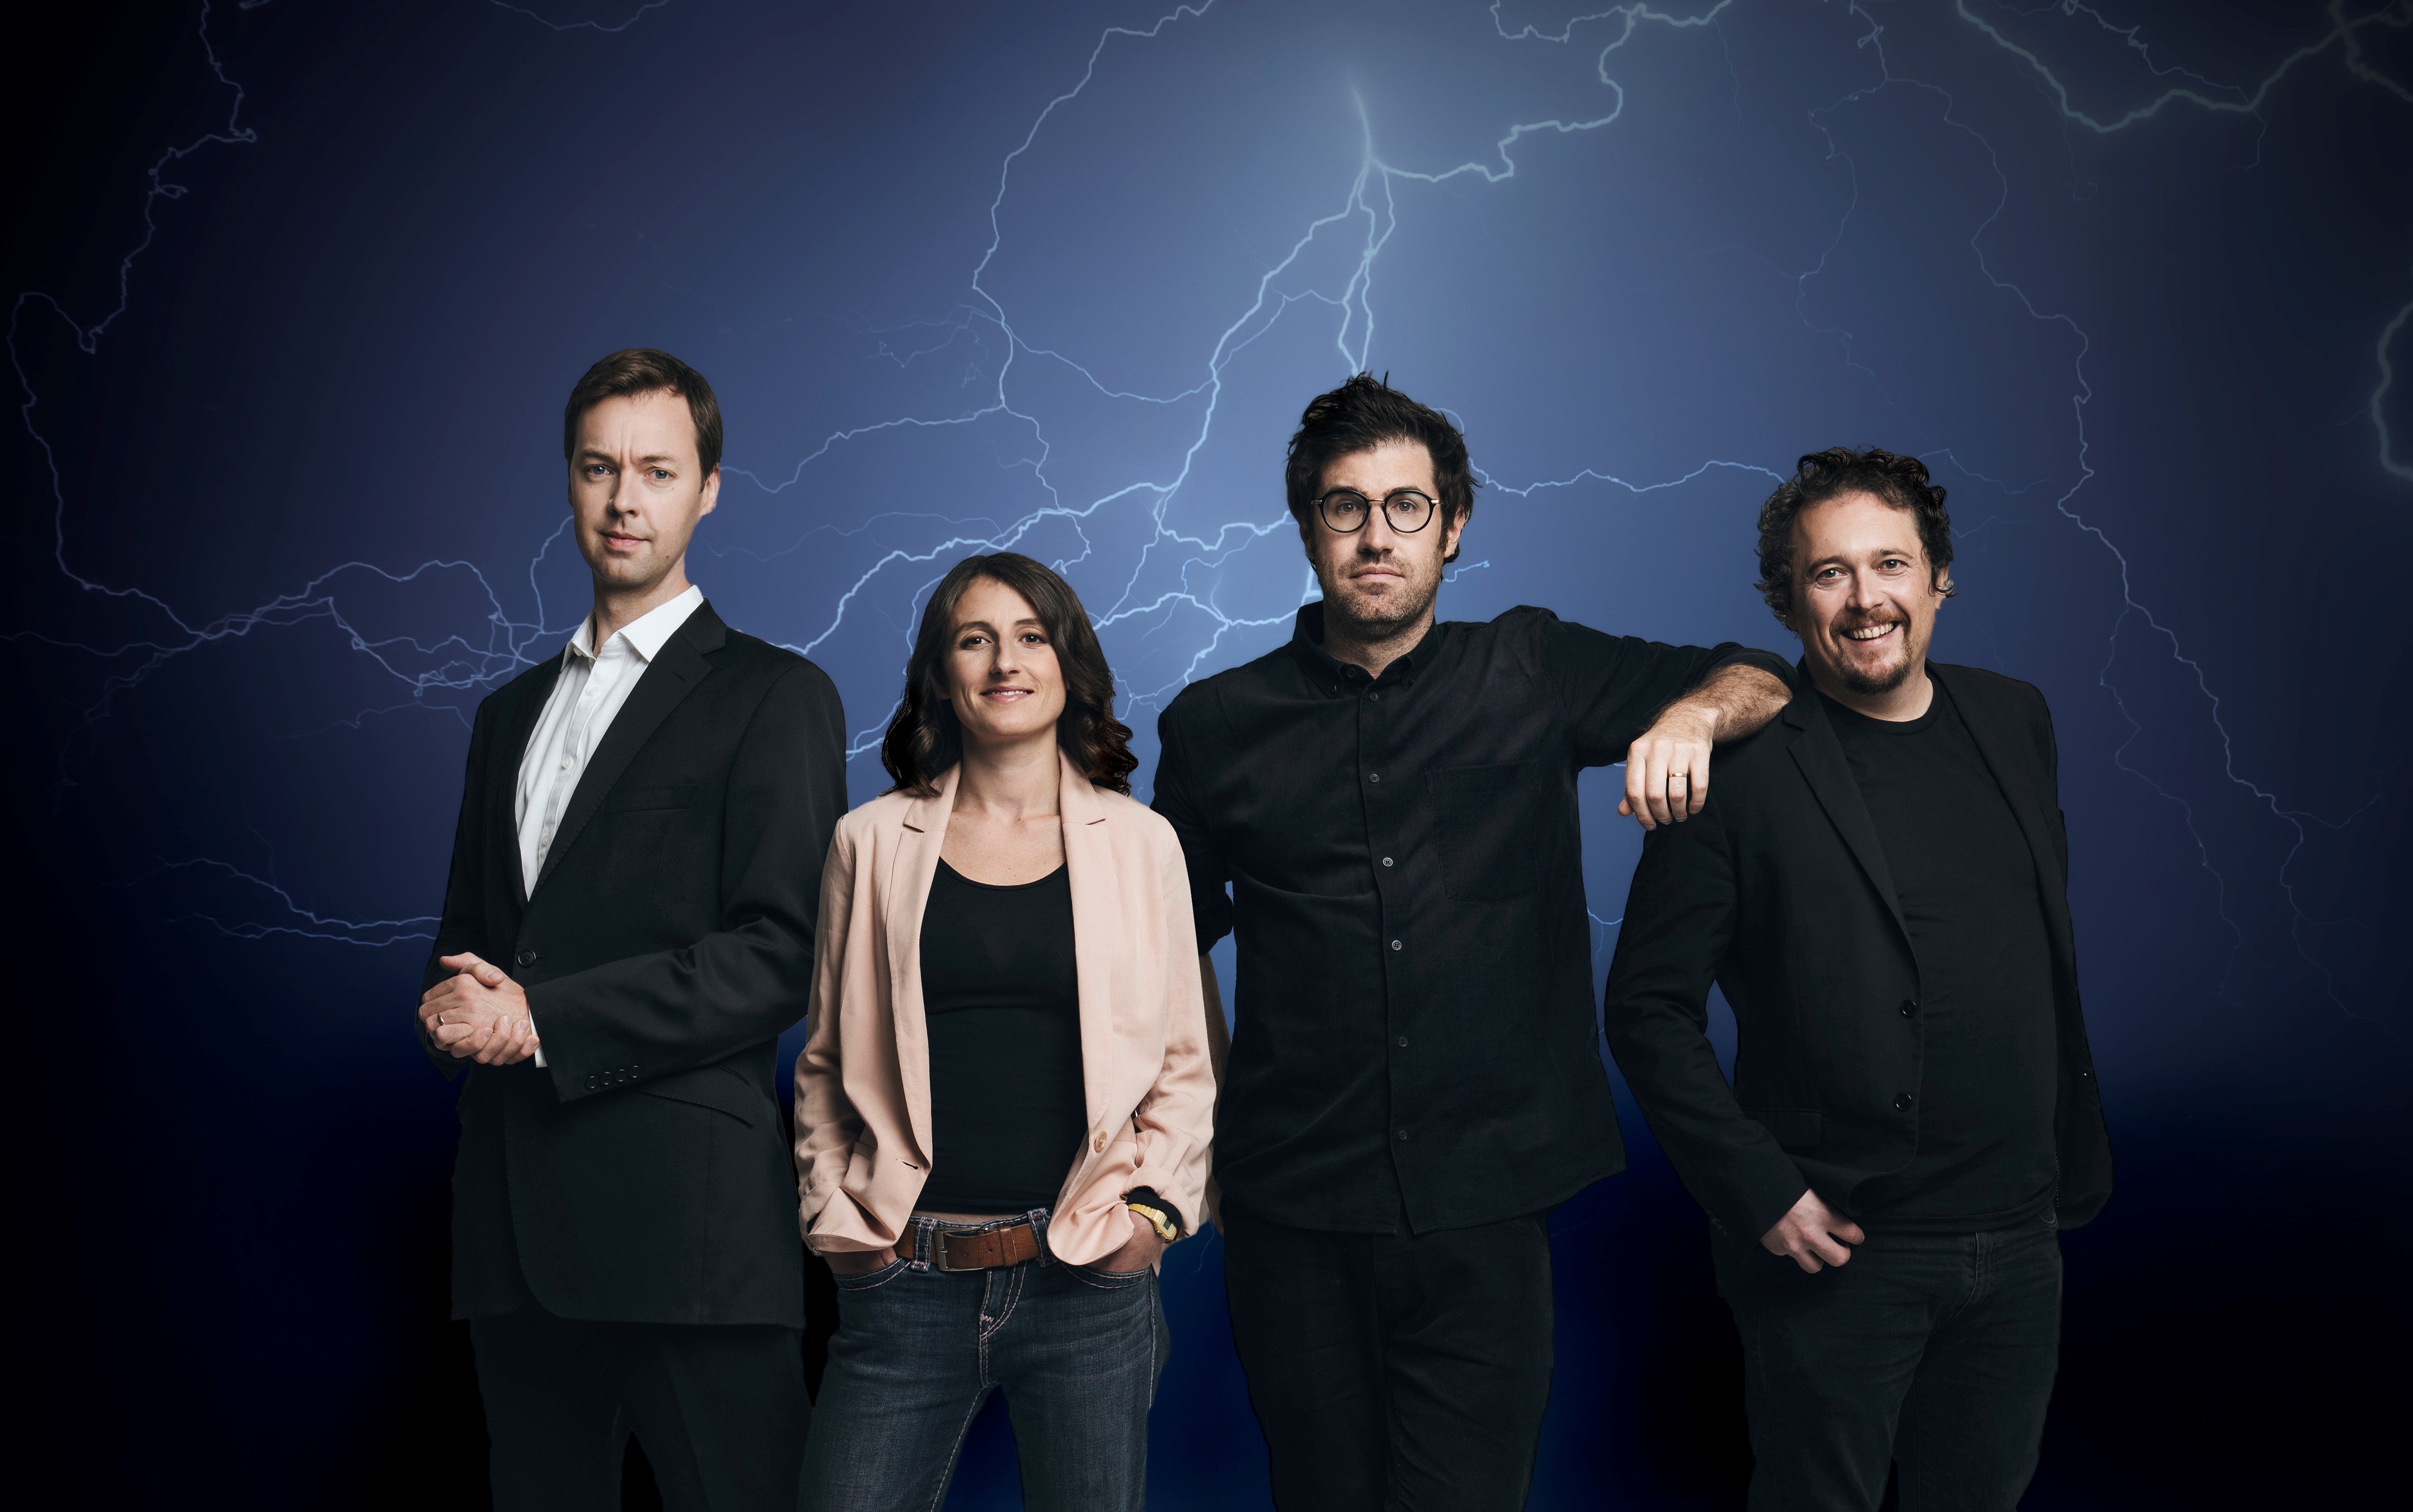 No Such Thing As A Fish: Thundernerds in London promo photo for Fan presale offer code